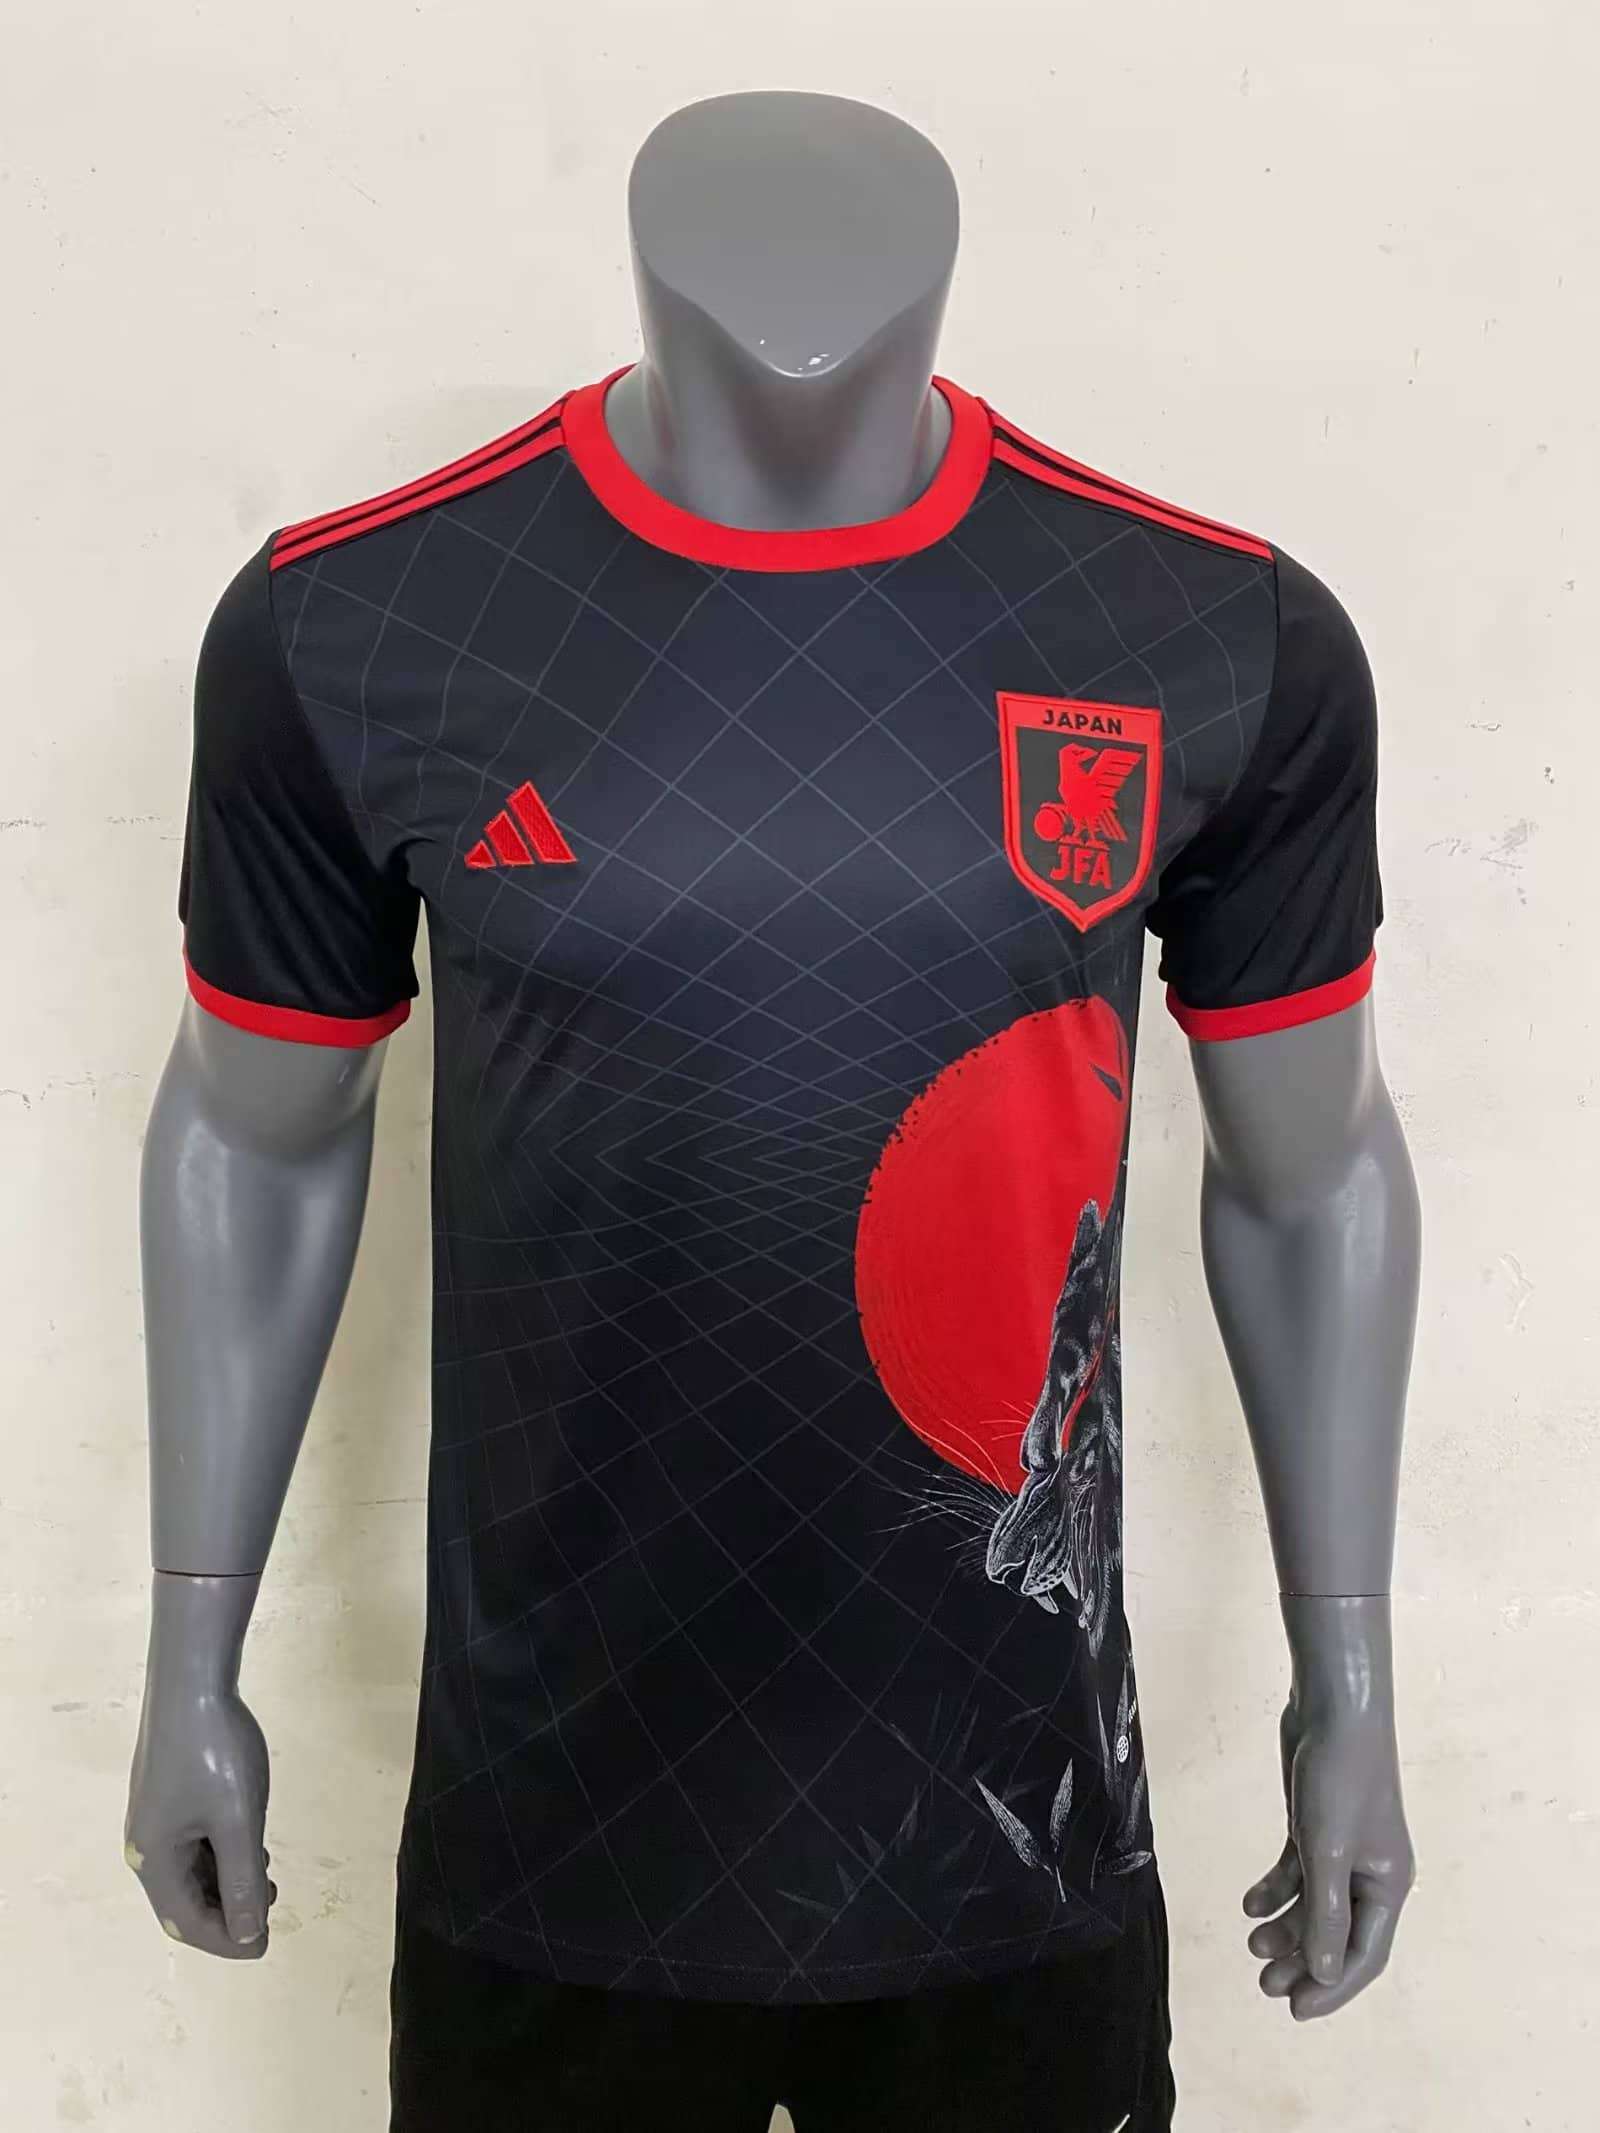 Japan Football Team Gets a World Cup Win With Anime-Inspired Uniforms